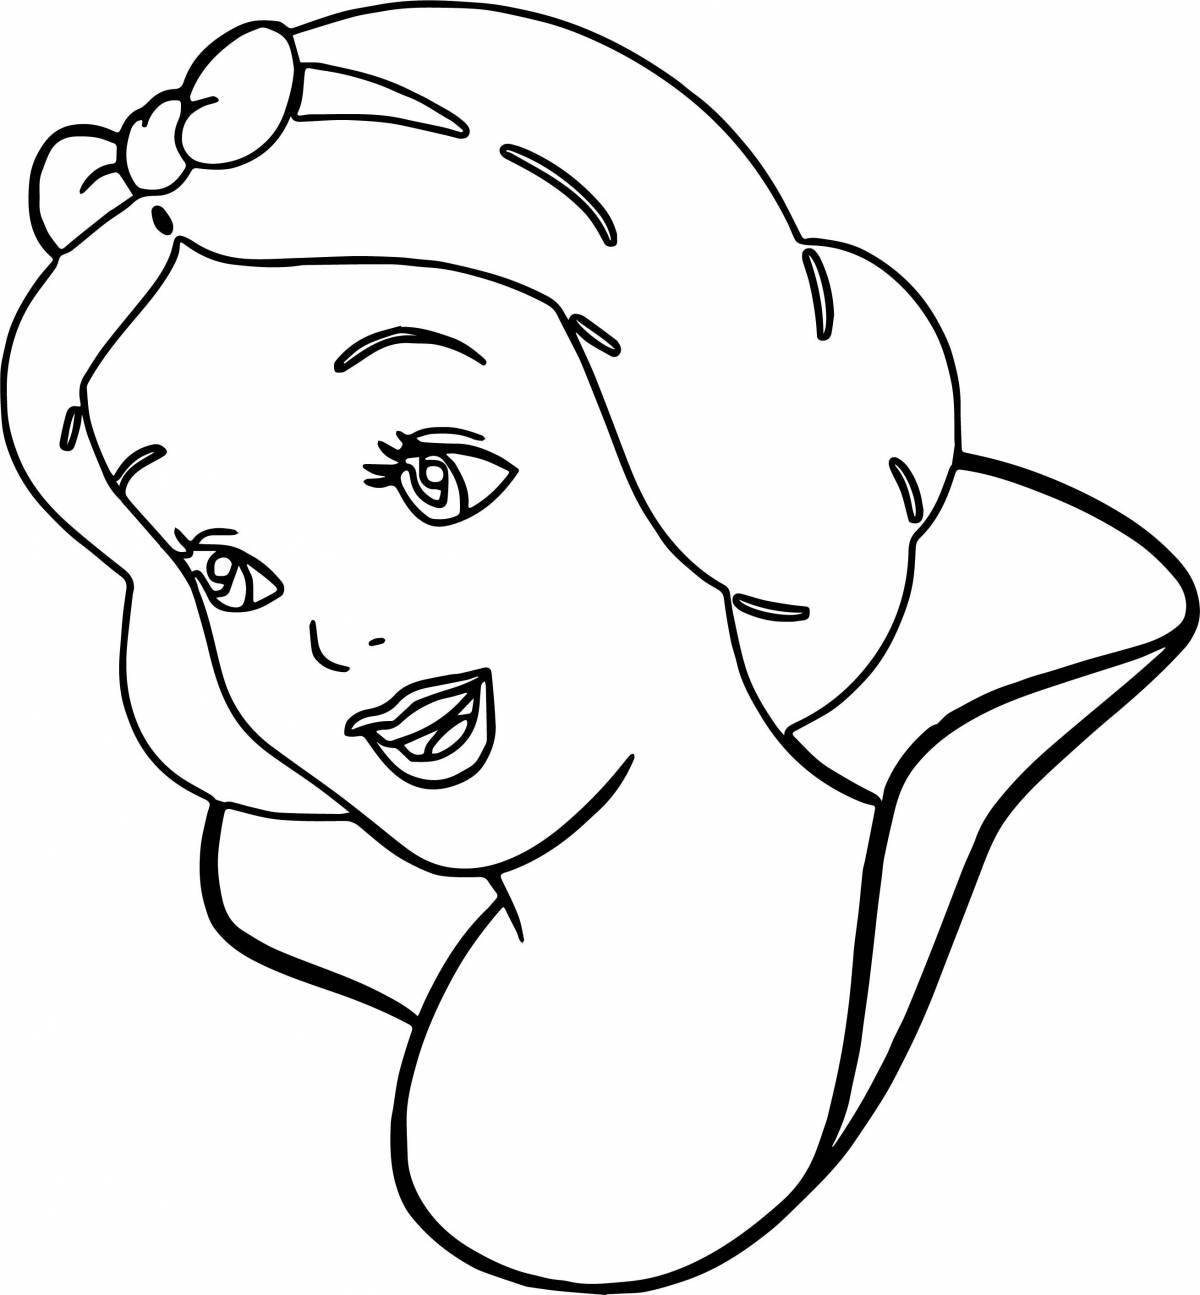 Outstanding doll head coloring page